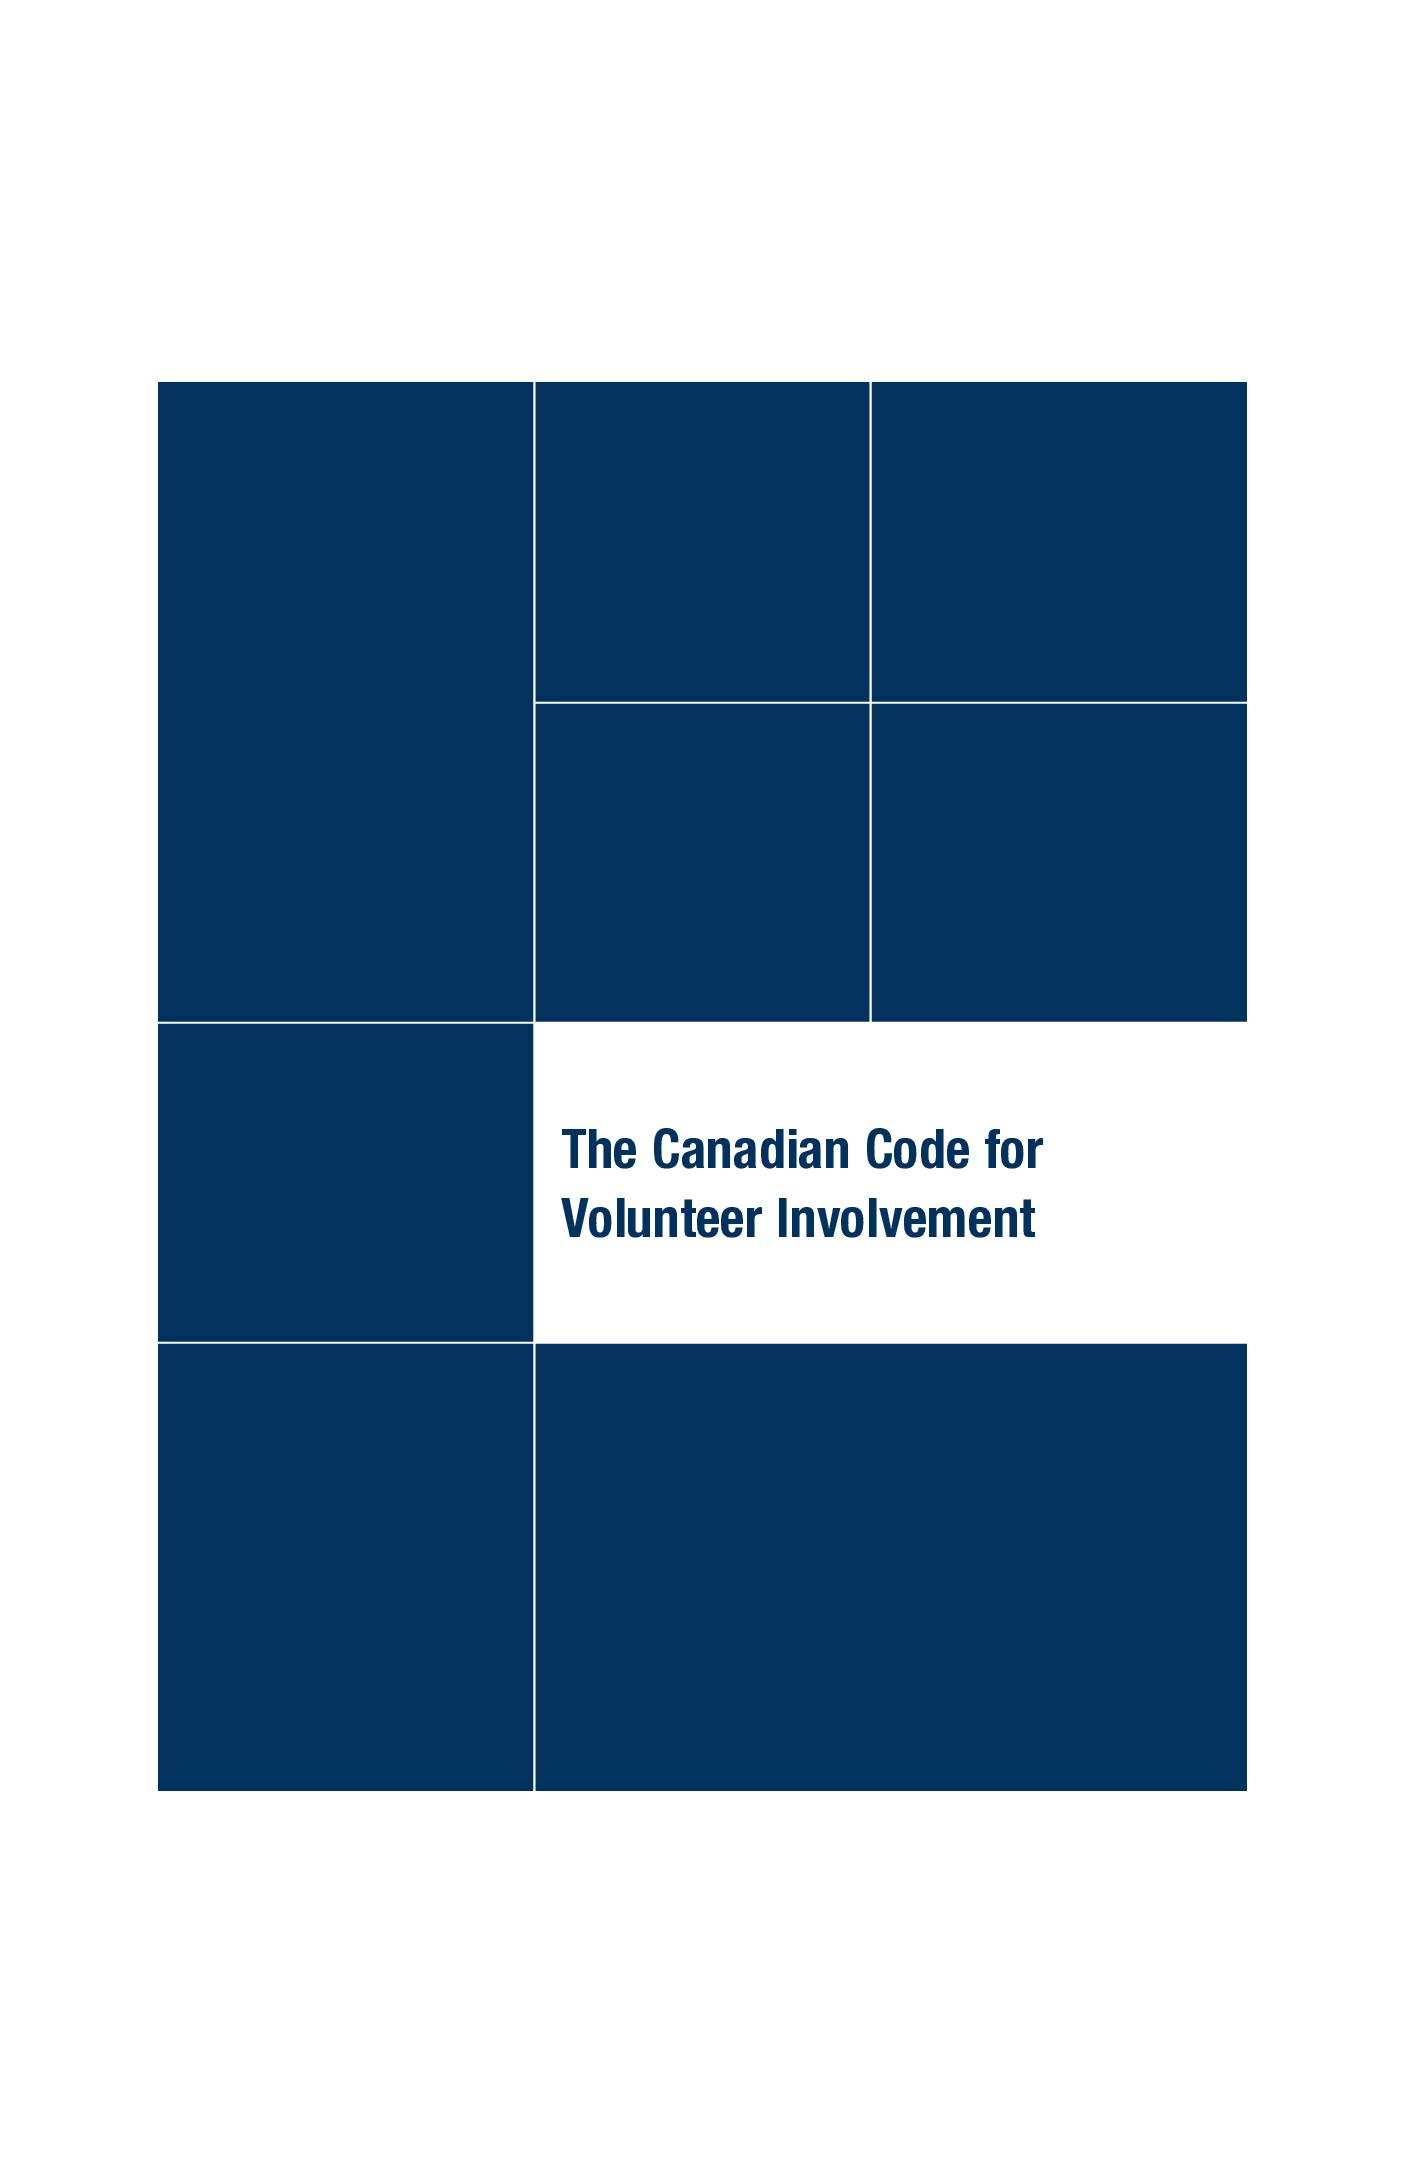 The Canadian Code for Volunteer Involvement